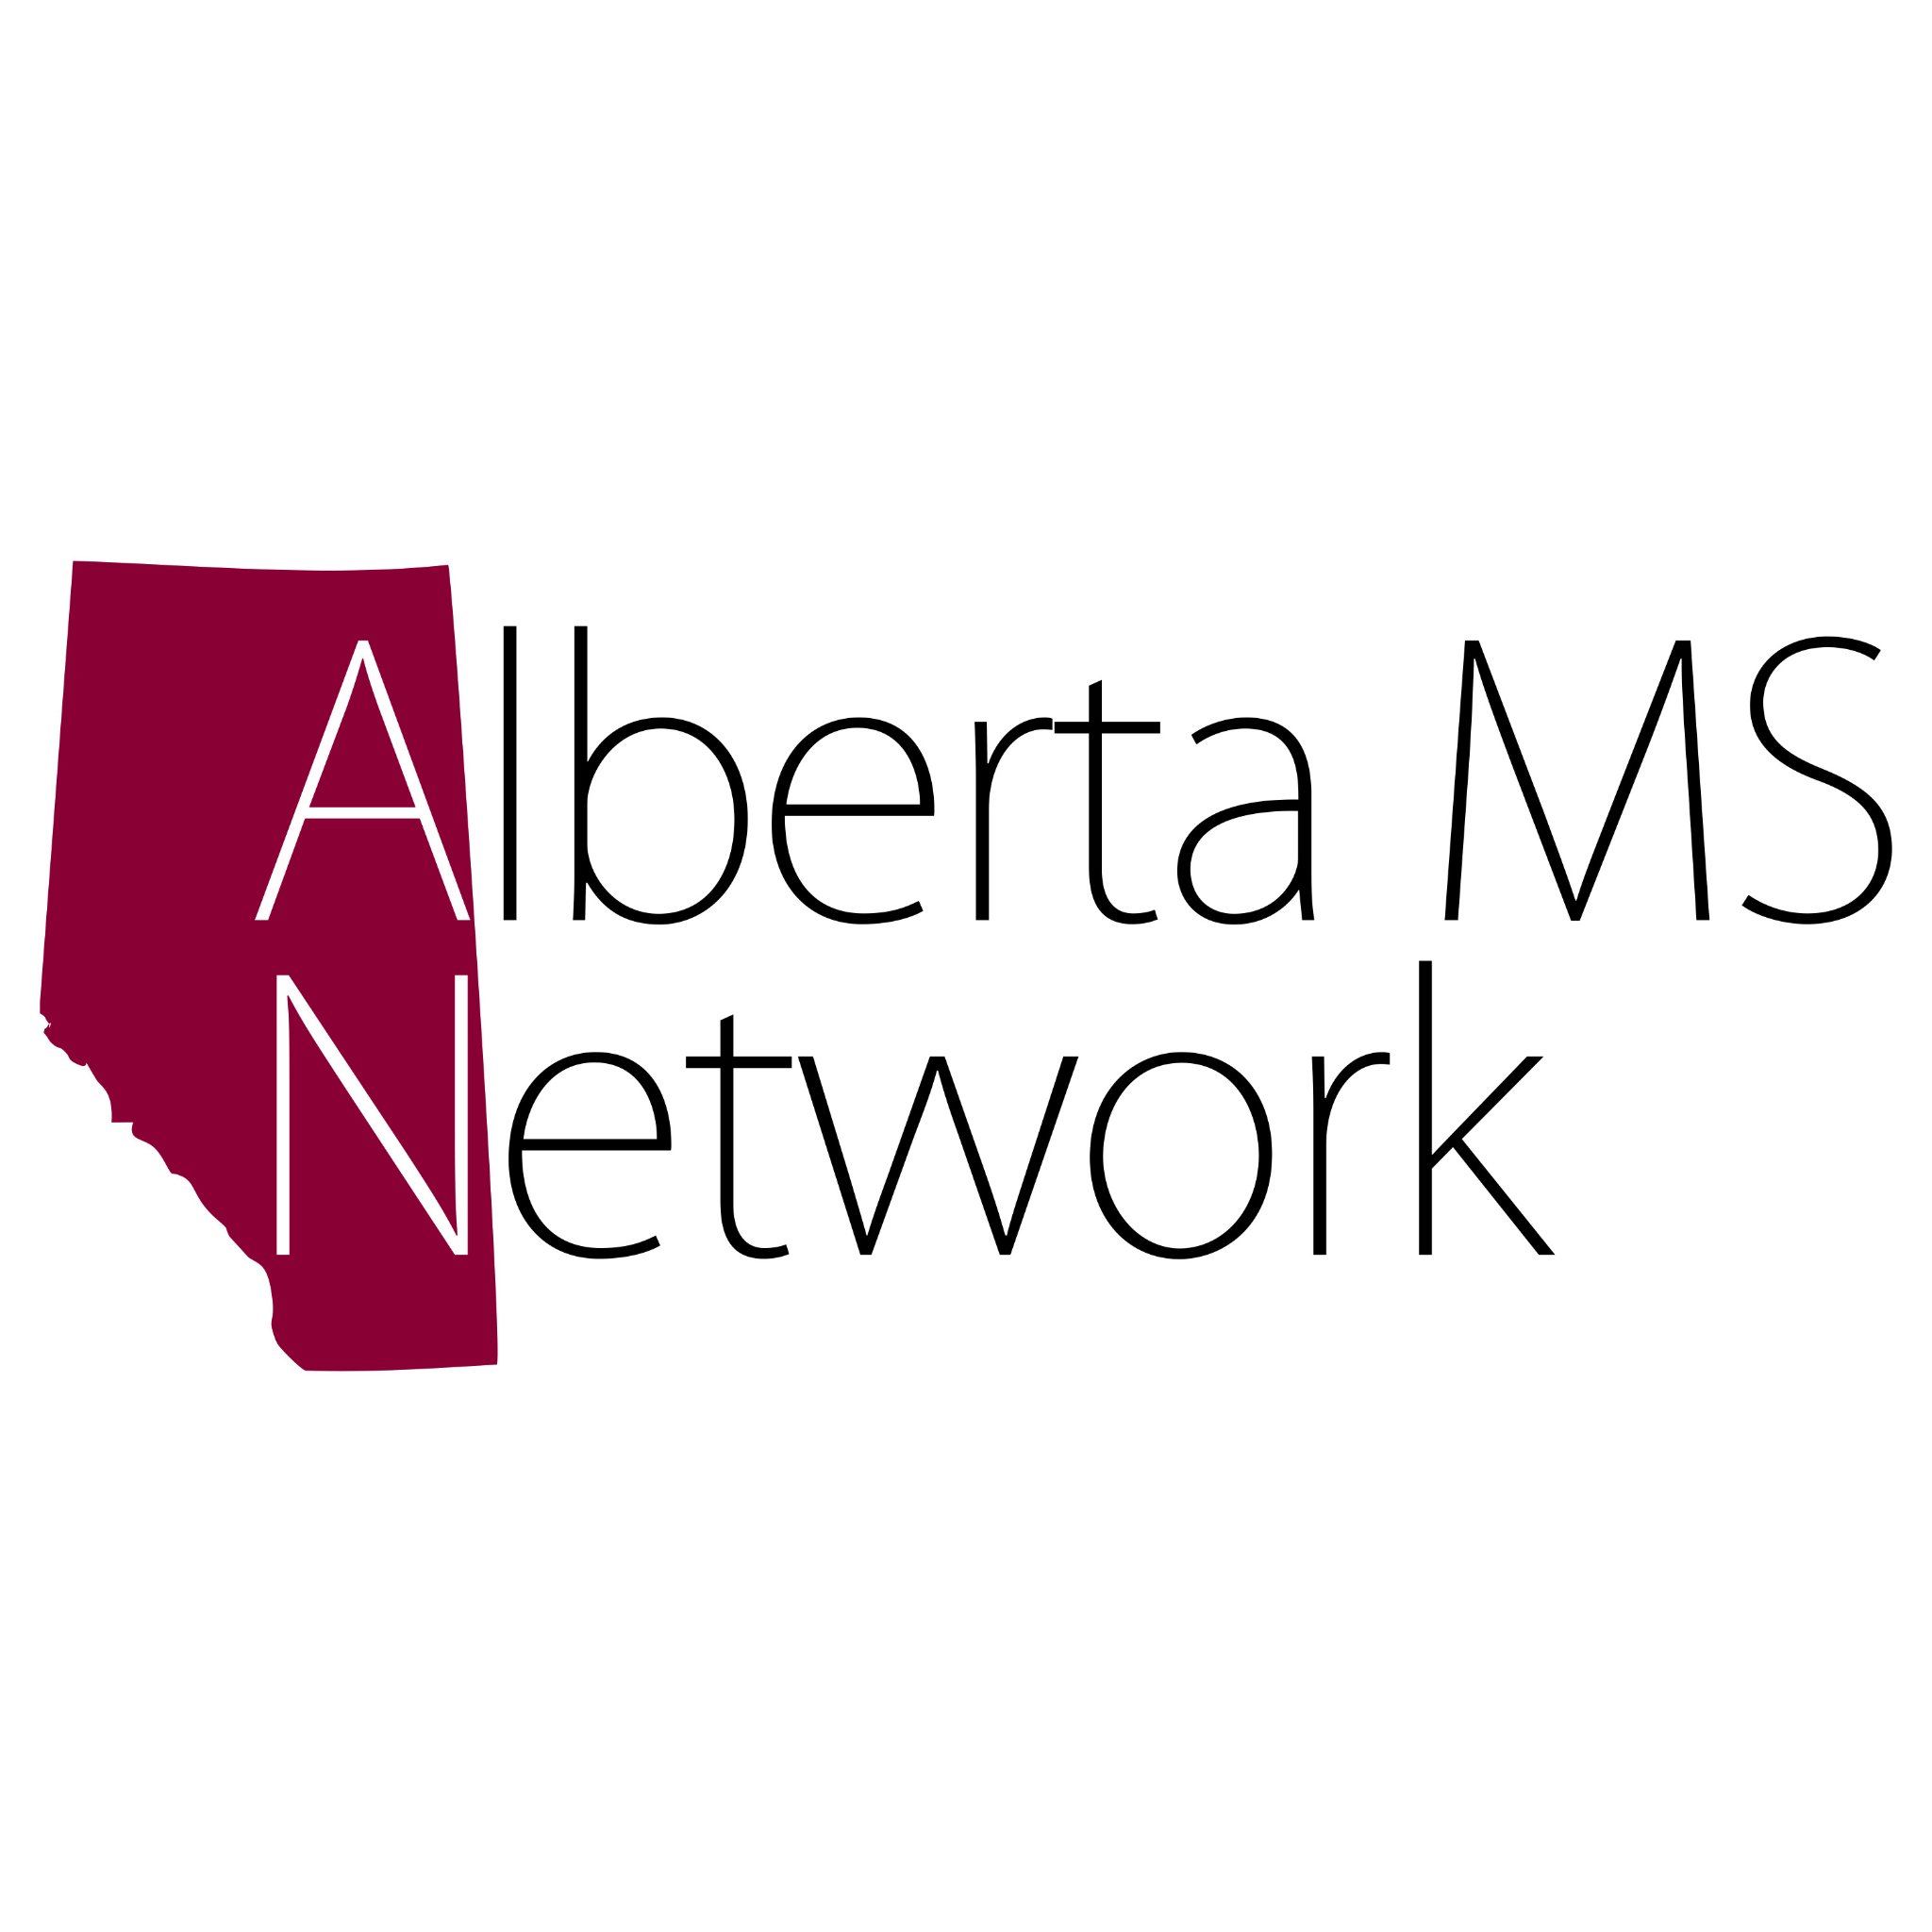 Educate. Collaborate. Motivate. Network of passionate MS researchers, clinicians and trainees in Alberta.